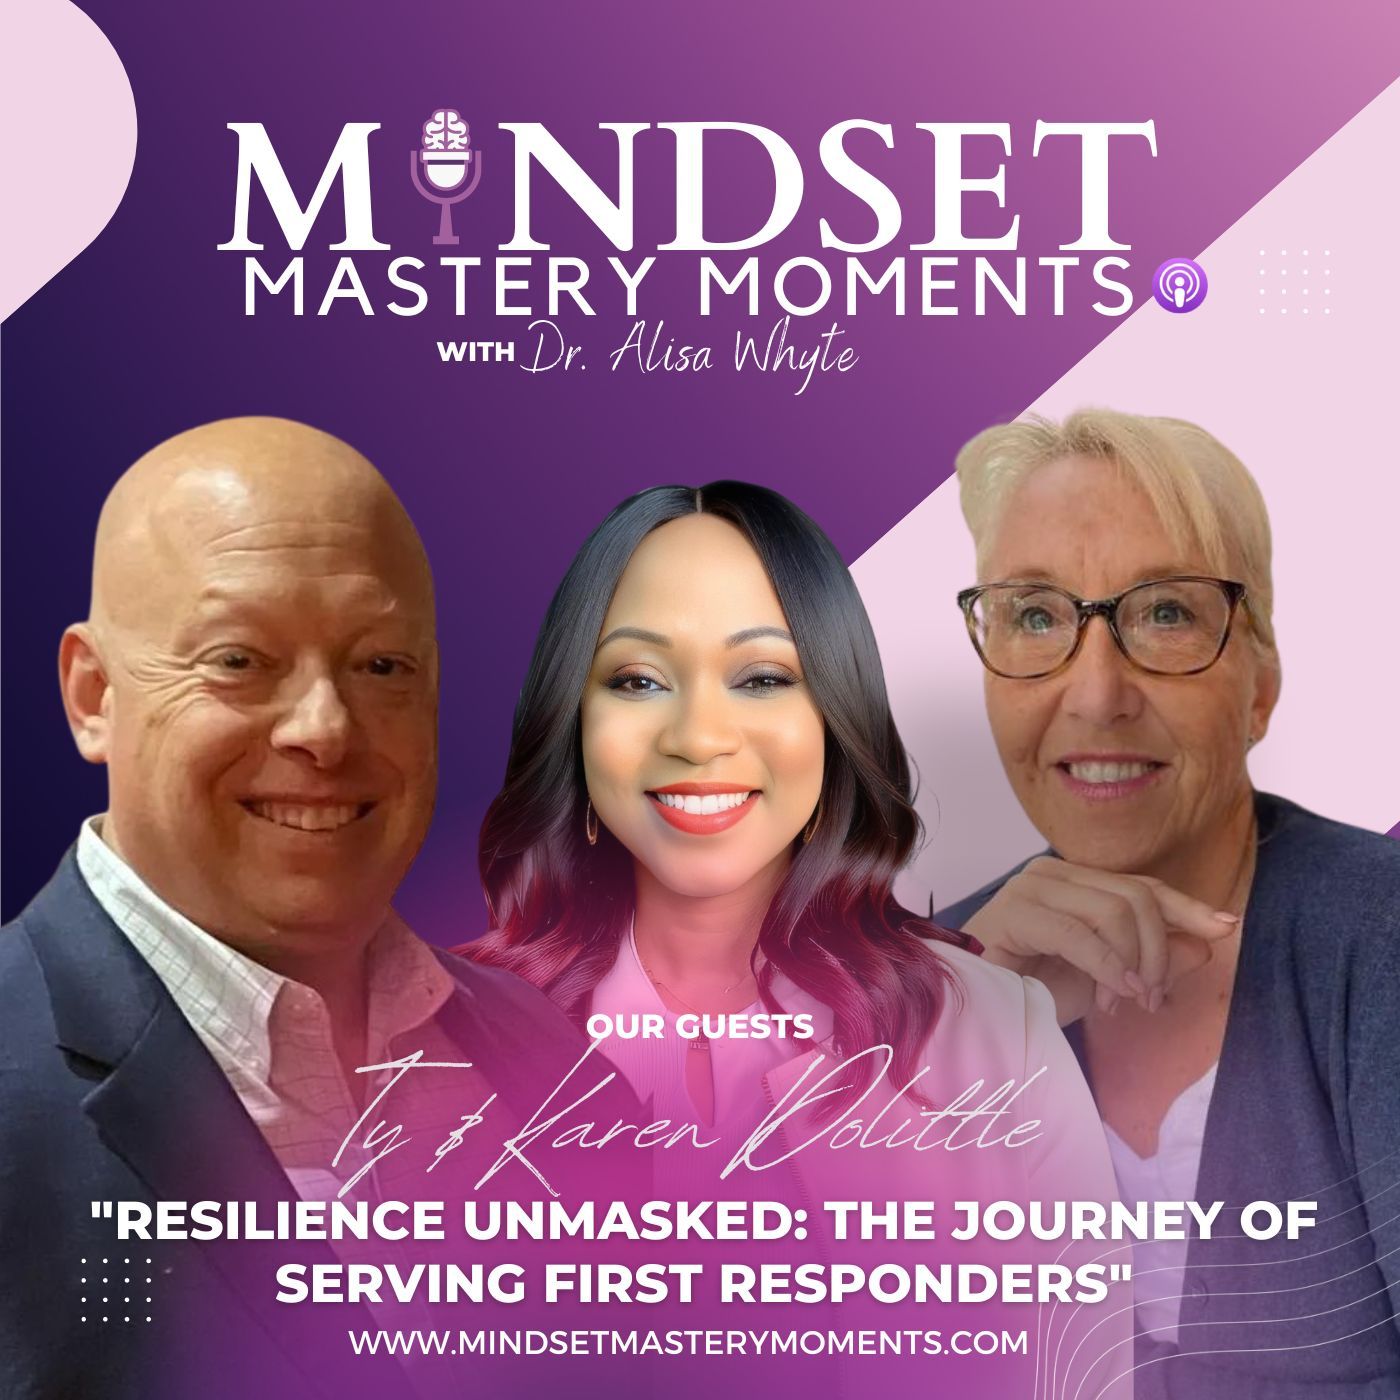 Resilience Unmasked: The Journey of Serving First Responders With Ty & Karen Dolittle